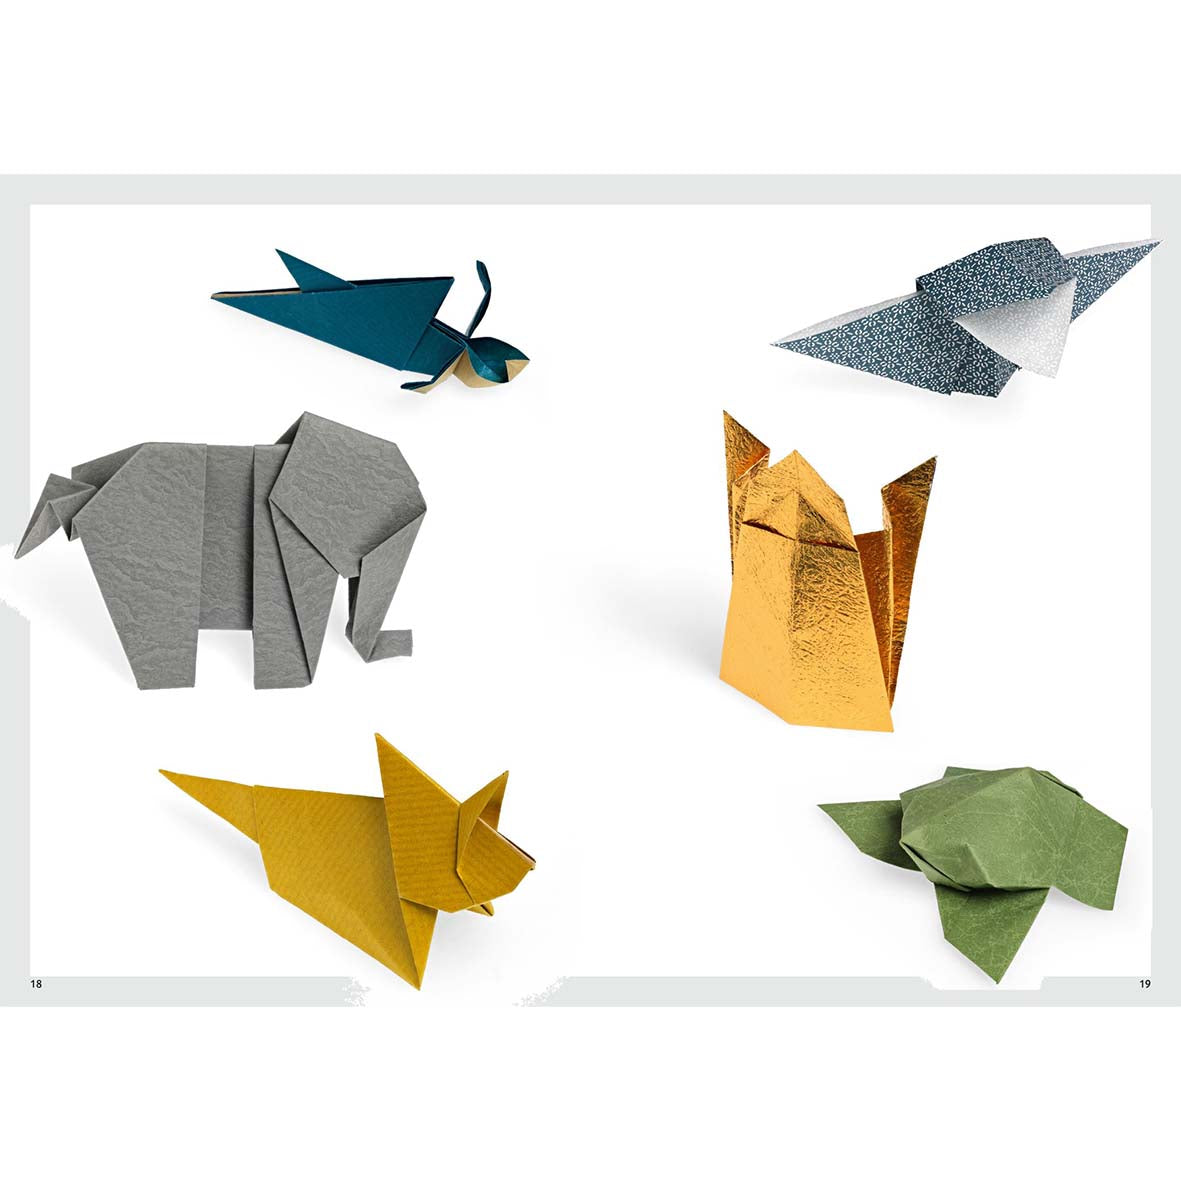 Intriguing origami - new edition